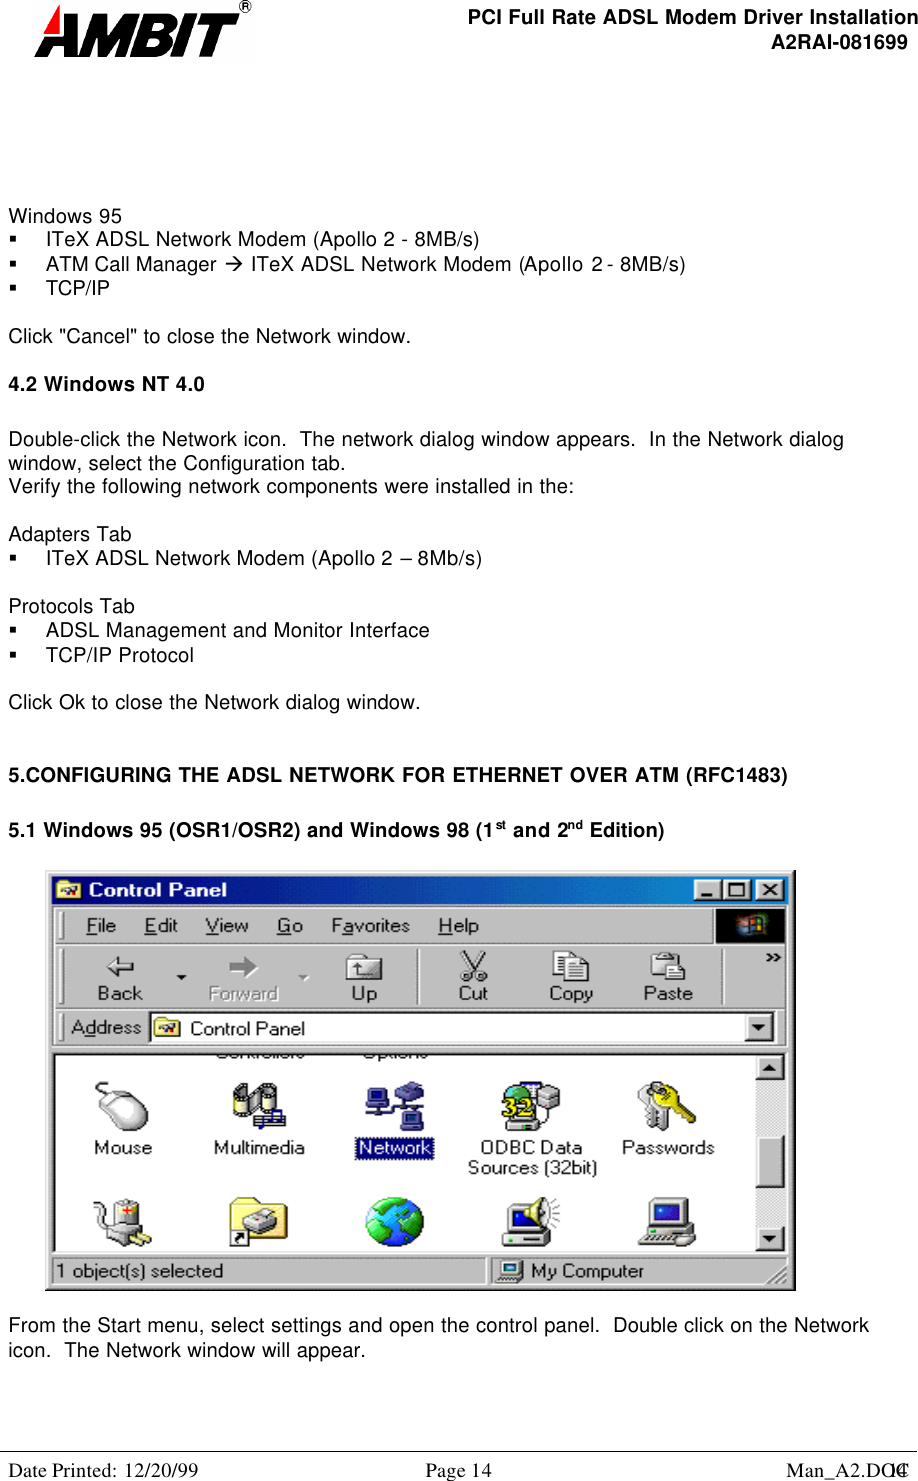 PCI Full Rate ADSL Modem Driver InstallationA2RAI-081699Date Printed: 12/20/99 Page 14 Man_A2.DOC14Windows 95§ ITeX ADSL Network Modem (Apollo 2 - 8MB/s)§ ATM Call Manager à ITeX ADSL Network Modem (Apollo 2 - 8MB/s)§ TCP/IPClick &quot;Cancel&quot; to close the Network window.4.2 Windows NT 4.0Double-click the Network icon.  The network dialog window appears.  In the Network dialogwindow, select the Configuration tab.Verify the following network components were installed in the:Adapters Tab§ ITeX ADSL Network Modem (Apollo 2 – 8Mb/s)Protocols Tab§ ADSL Management and Monitor Interface§ TCP/IP ProtocolClick Ok to close the Network dialog window.5.CONFIGURING THE ADSL NETWORK FOR ETHERNET OVER ATM (RFC1483)5.1 Windows 95 (OSR1/OSR2) and Windows 98 (1st and 2nd Edition)From the Start menu, select settings and open the control panel.  Double click on the Networkicon.  The Network window will appear.